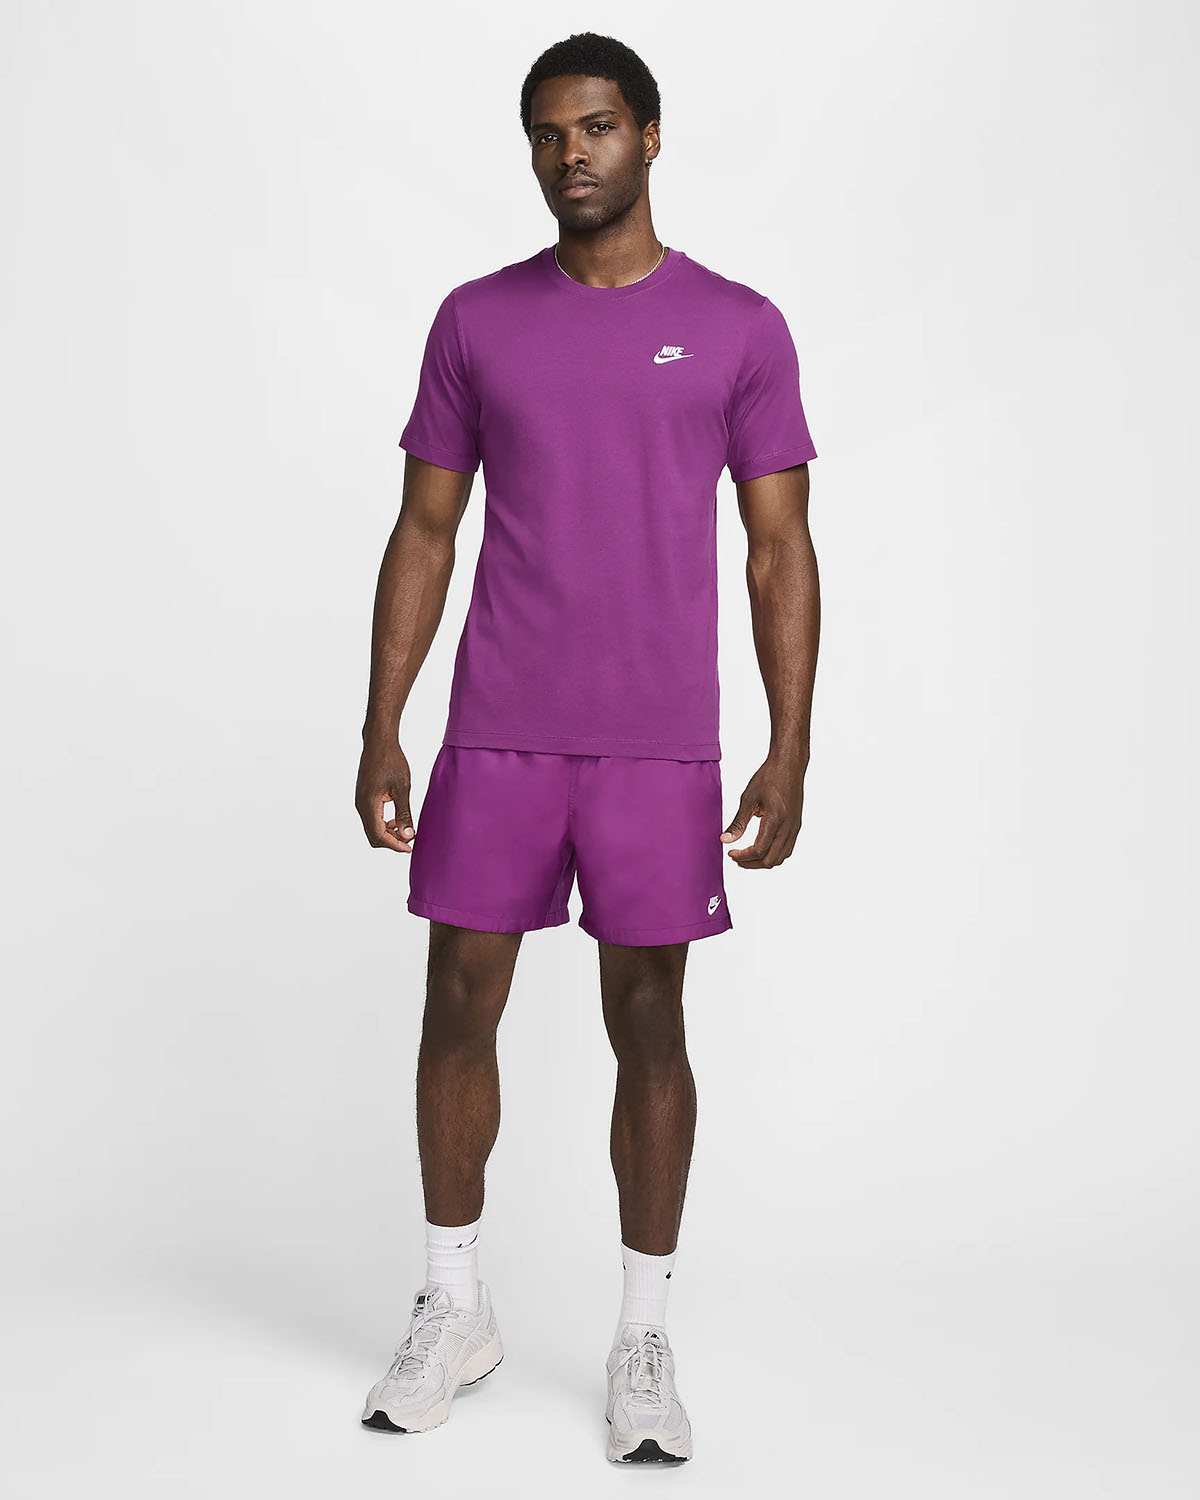 Nike Viotech Shirt and Shorts Outfit